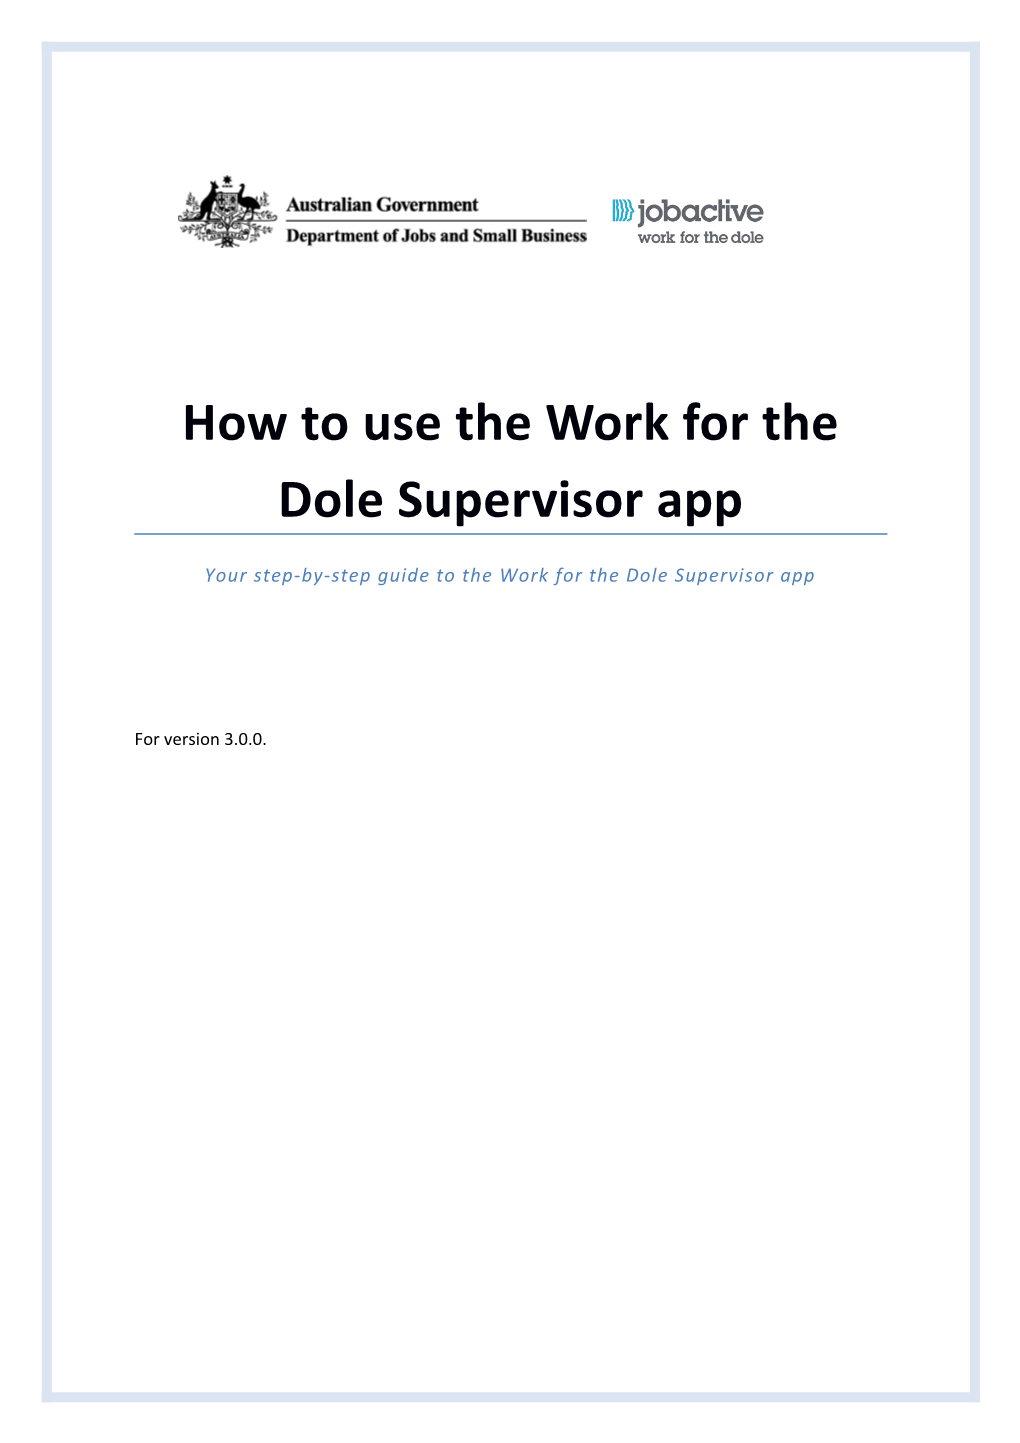 How to Use the Work for the Dole Supervisor App